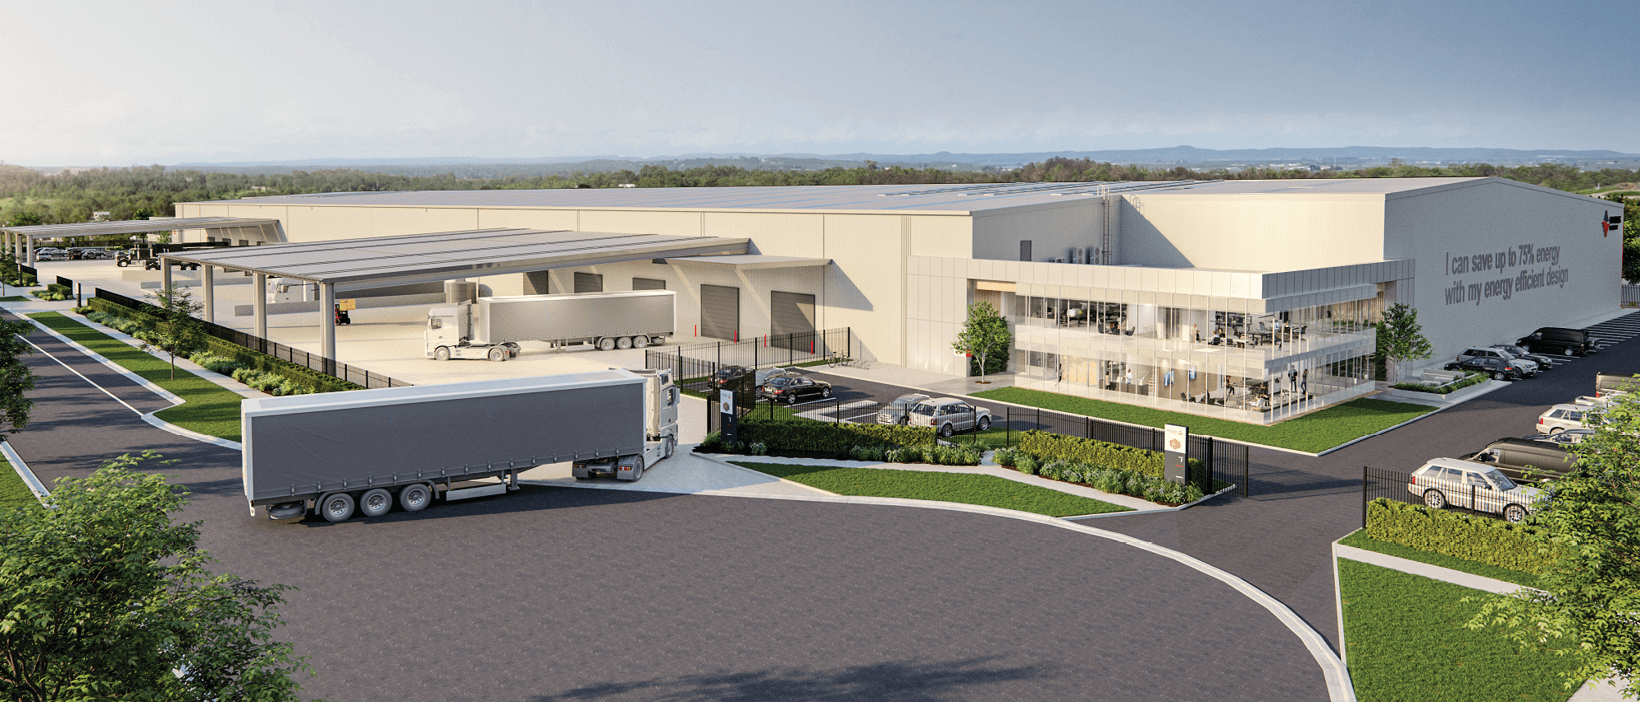 Komatsu Australia commits to 10-year lease at Canvas West estate in Melbourne